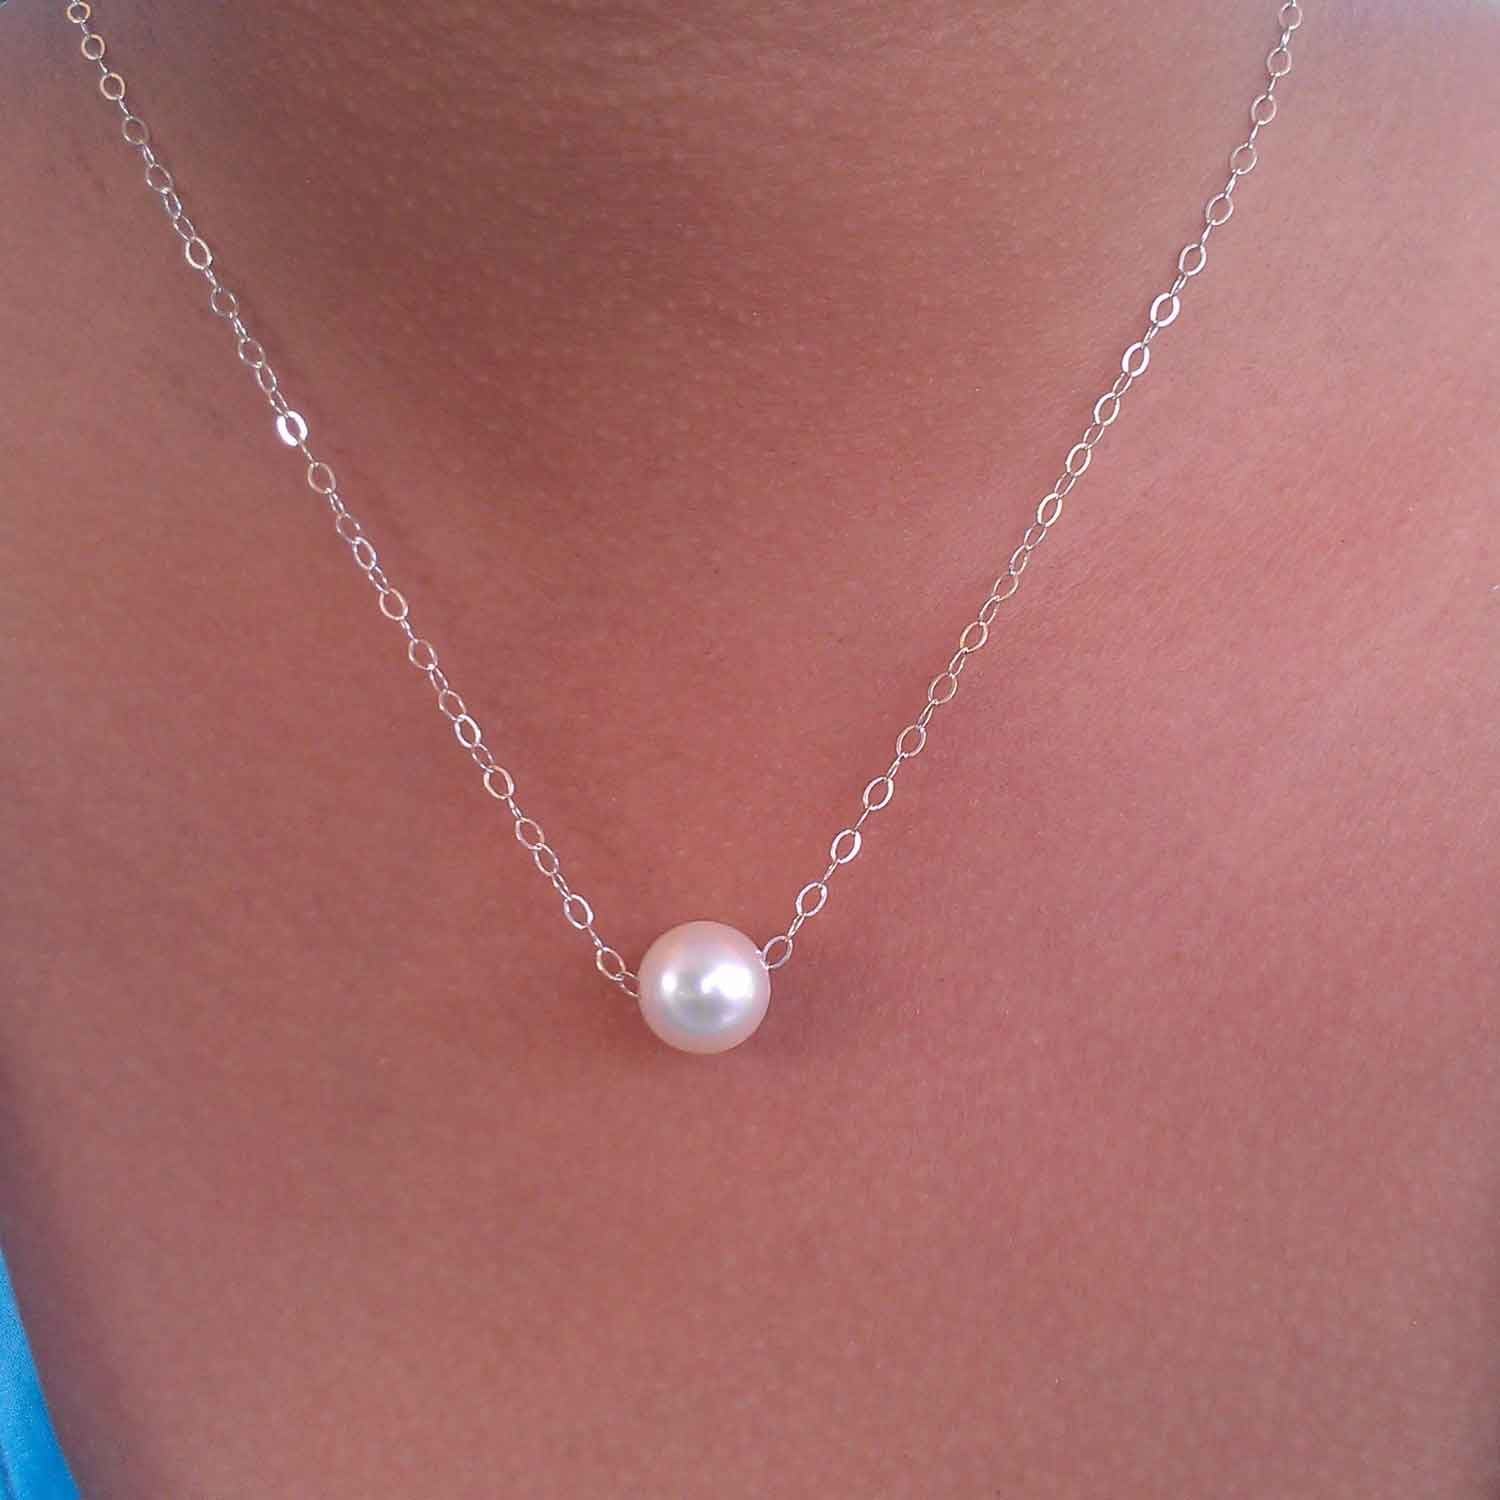 Freshwater Pearl Necklace, Illusion Necklace, 18, White Real